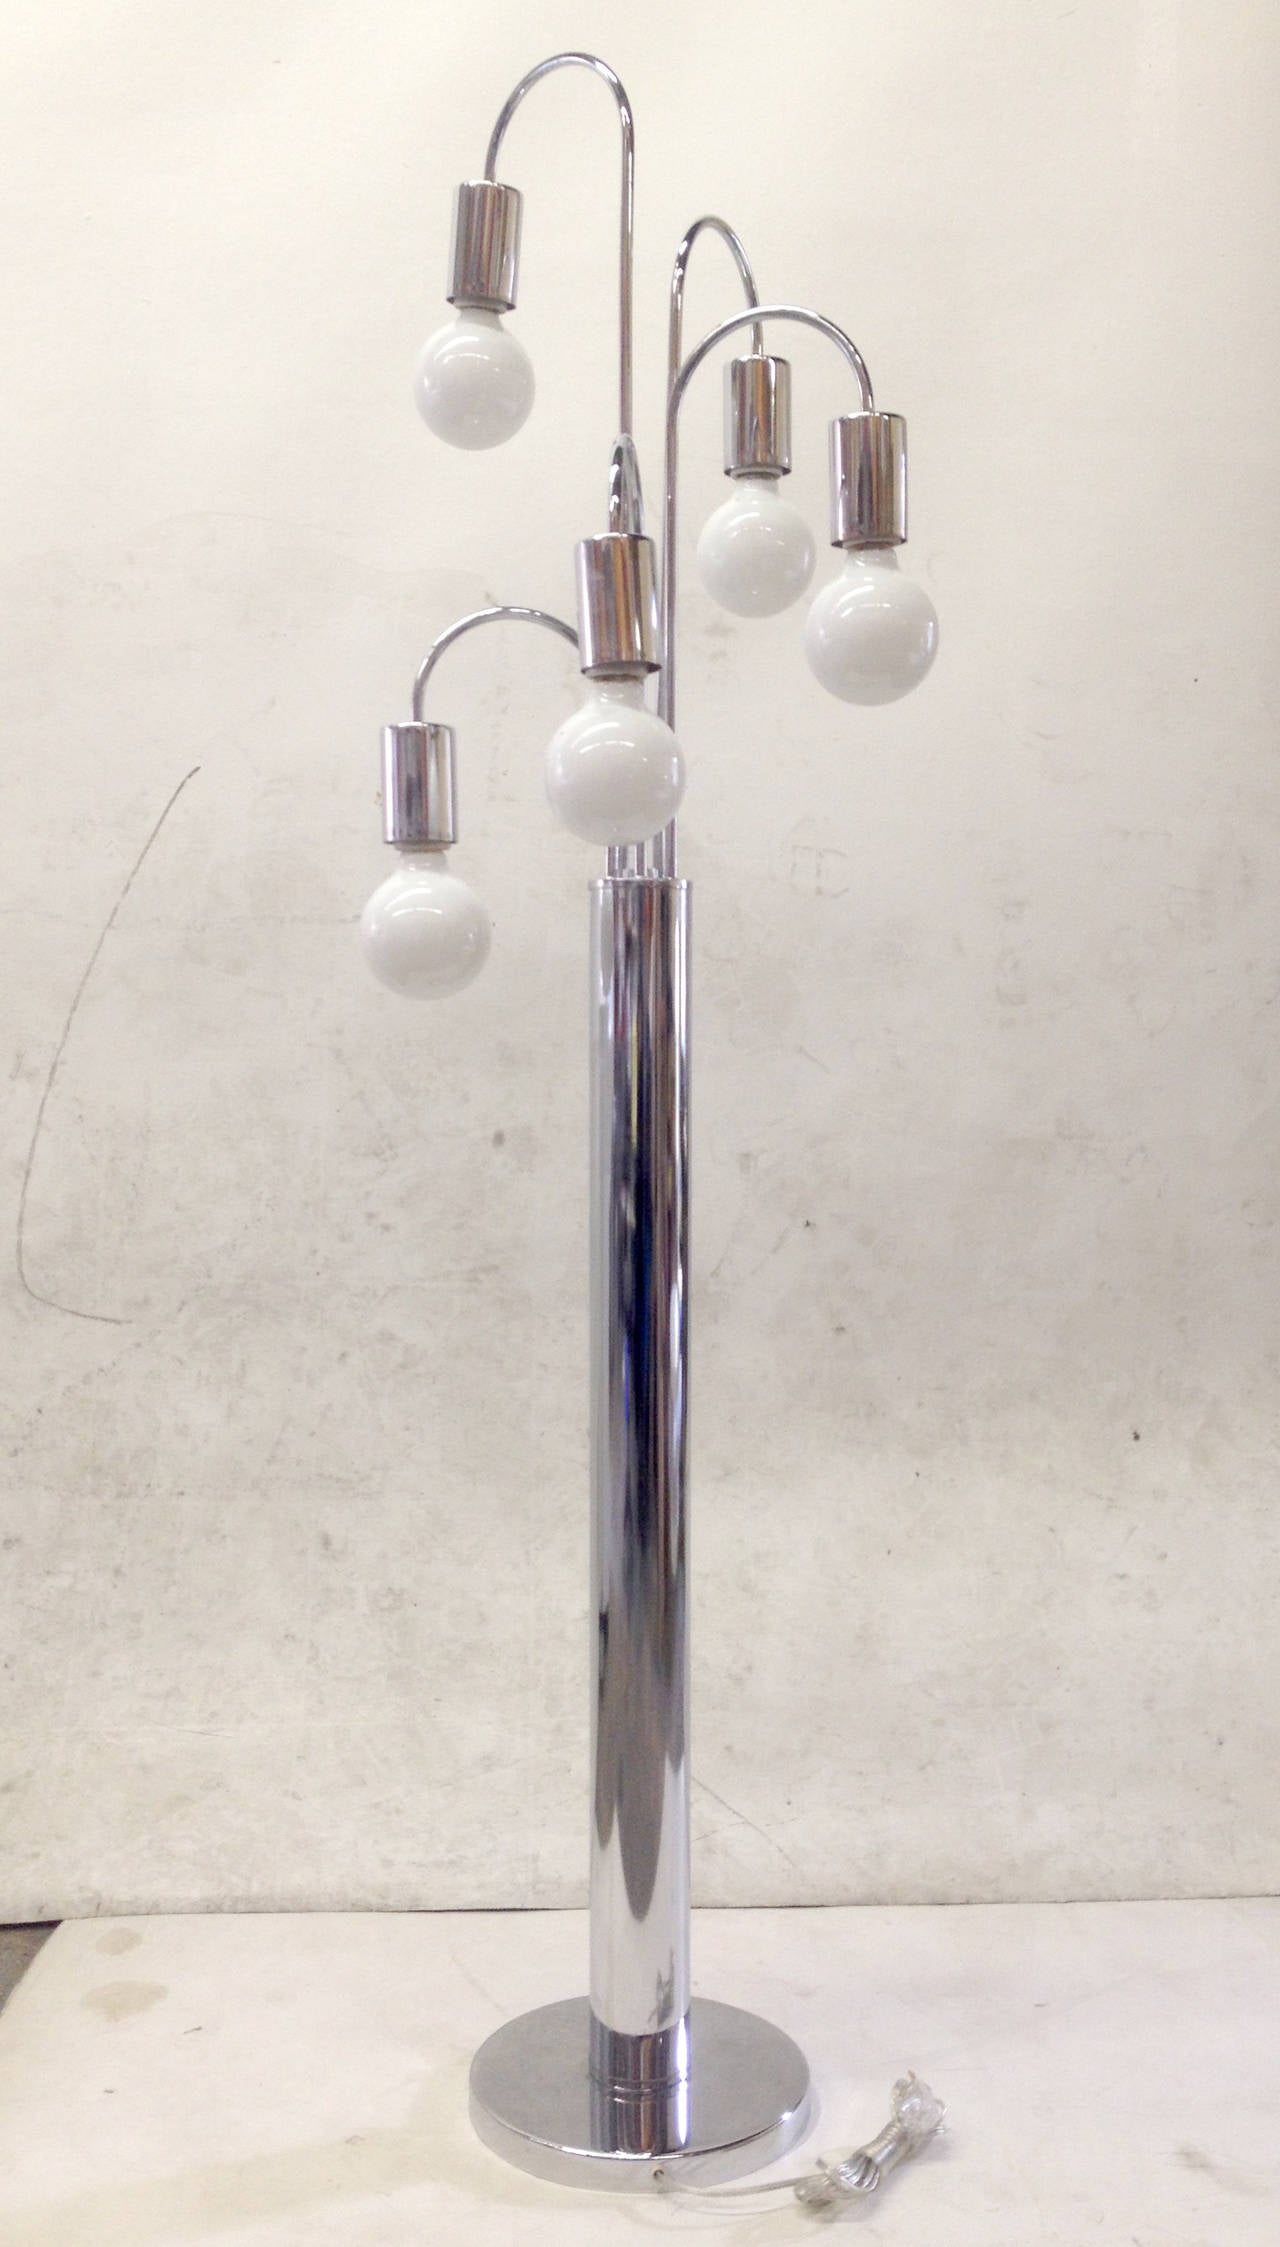 This five-arm floor lamp has a very 1970s design rendered entirely in chrome. Five curved branches radiate from the central cylinder in a helix and each ends in an opaque white globe bulb. The lamp is operated by a dimming dial that controls the